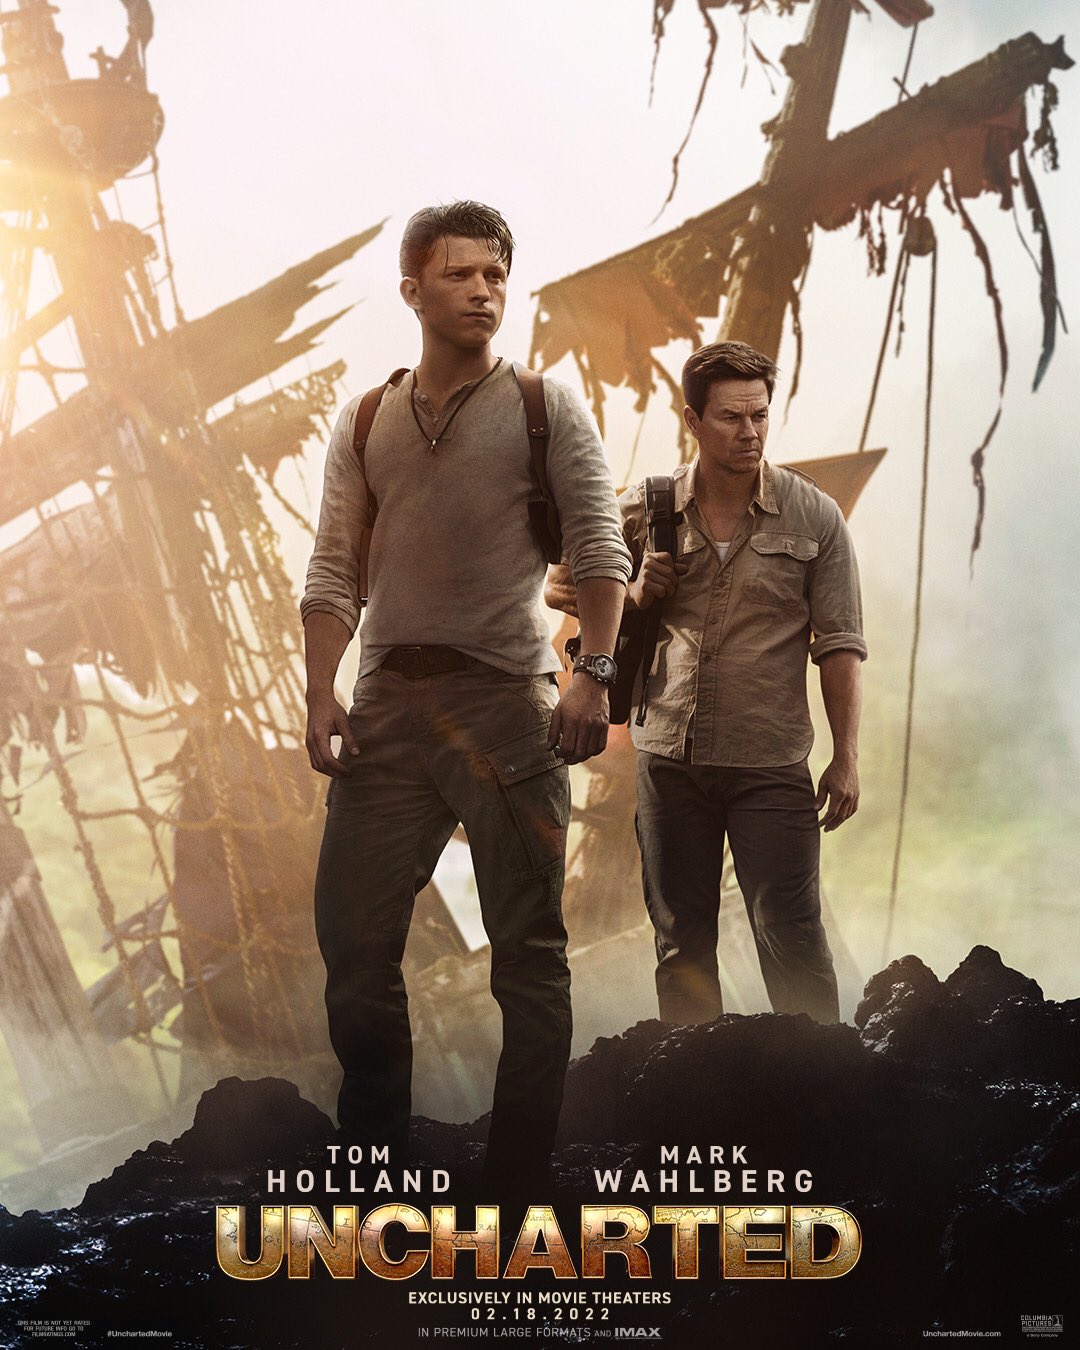 Sony gives us a new Uncharted movie trailer to usher in the holidays